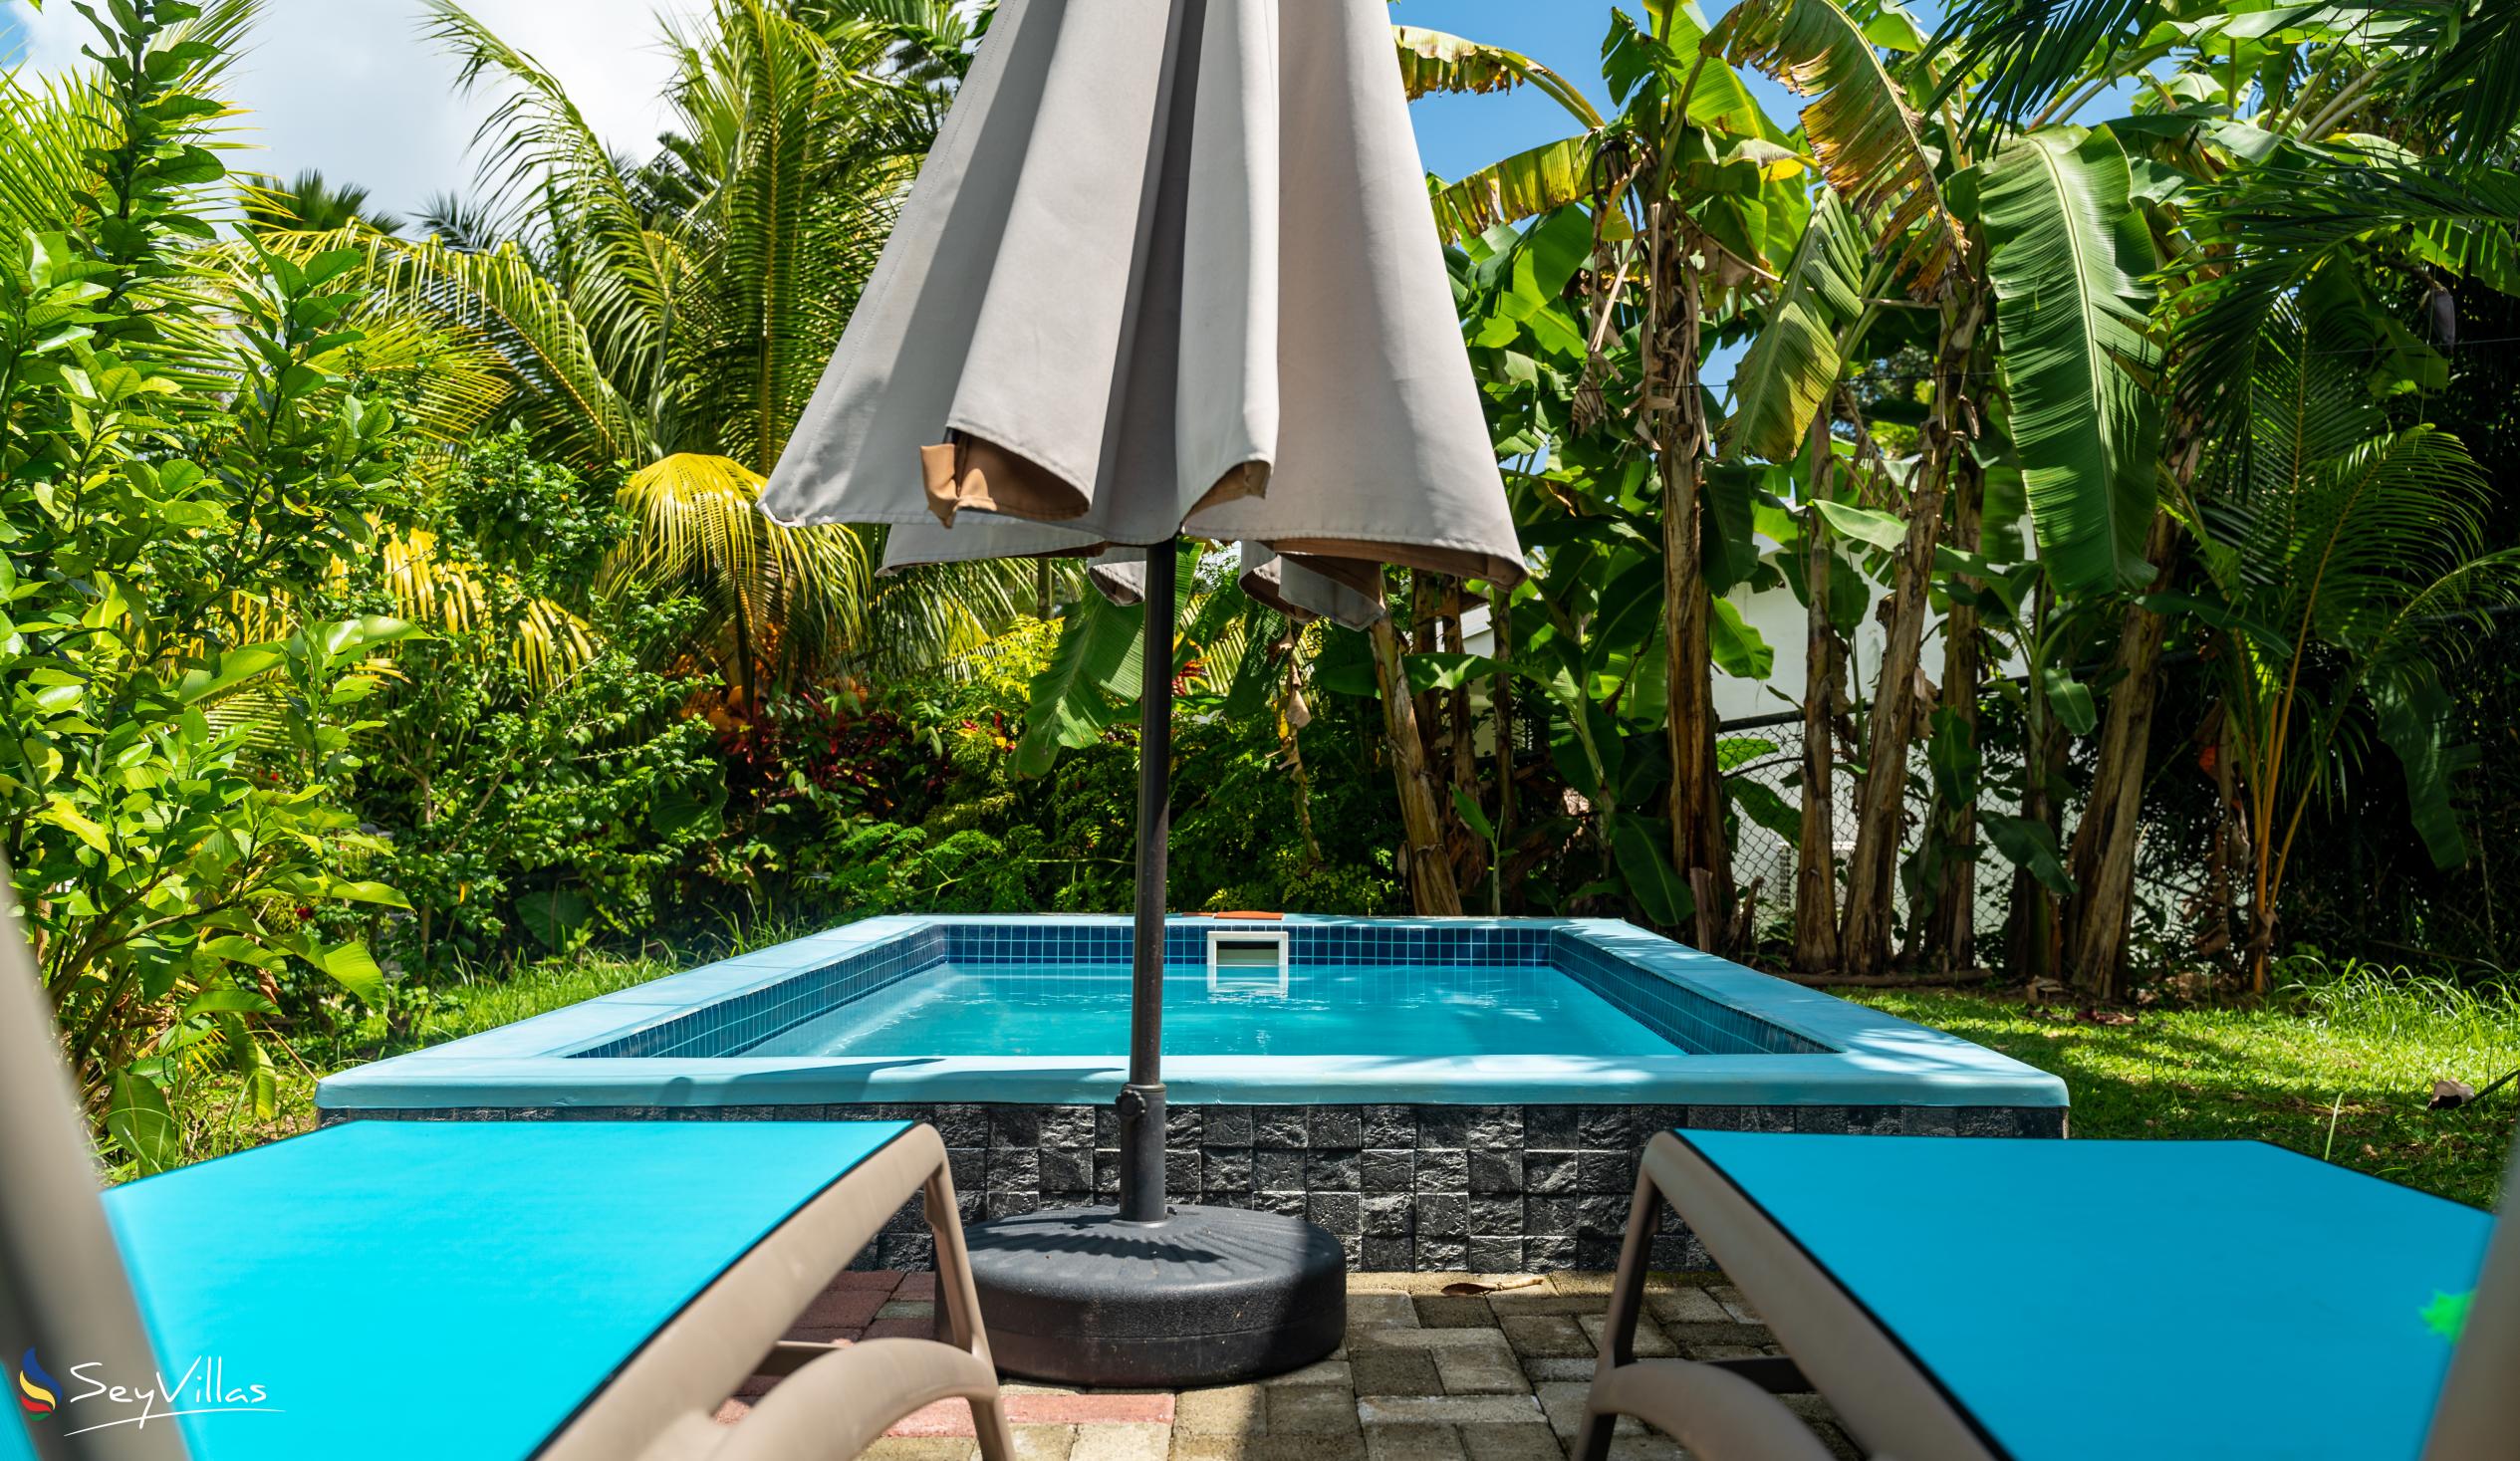 Photo 7: Ogumka Self Catering Beoliere - Outdoor area - Mahé (Seychelles)